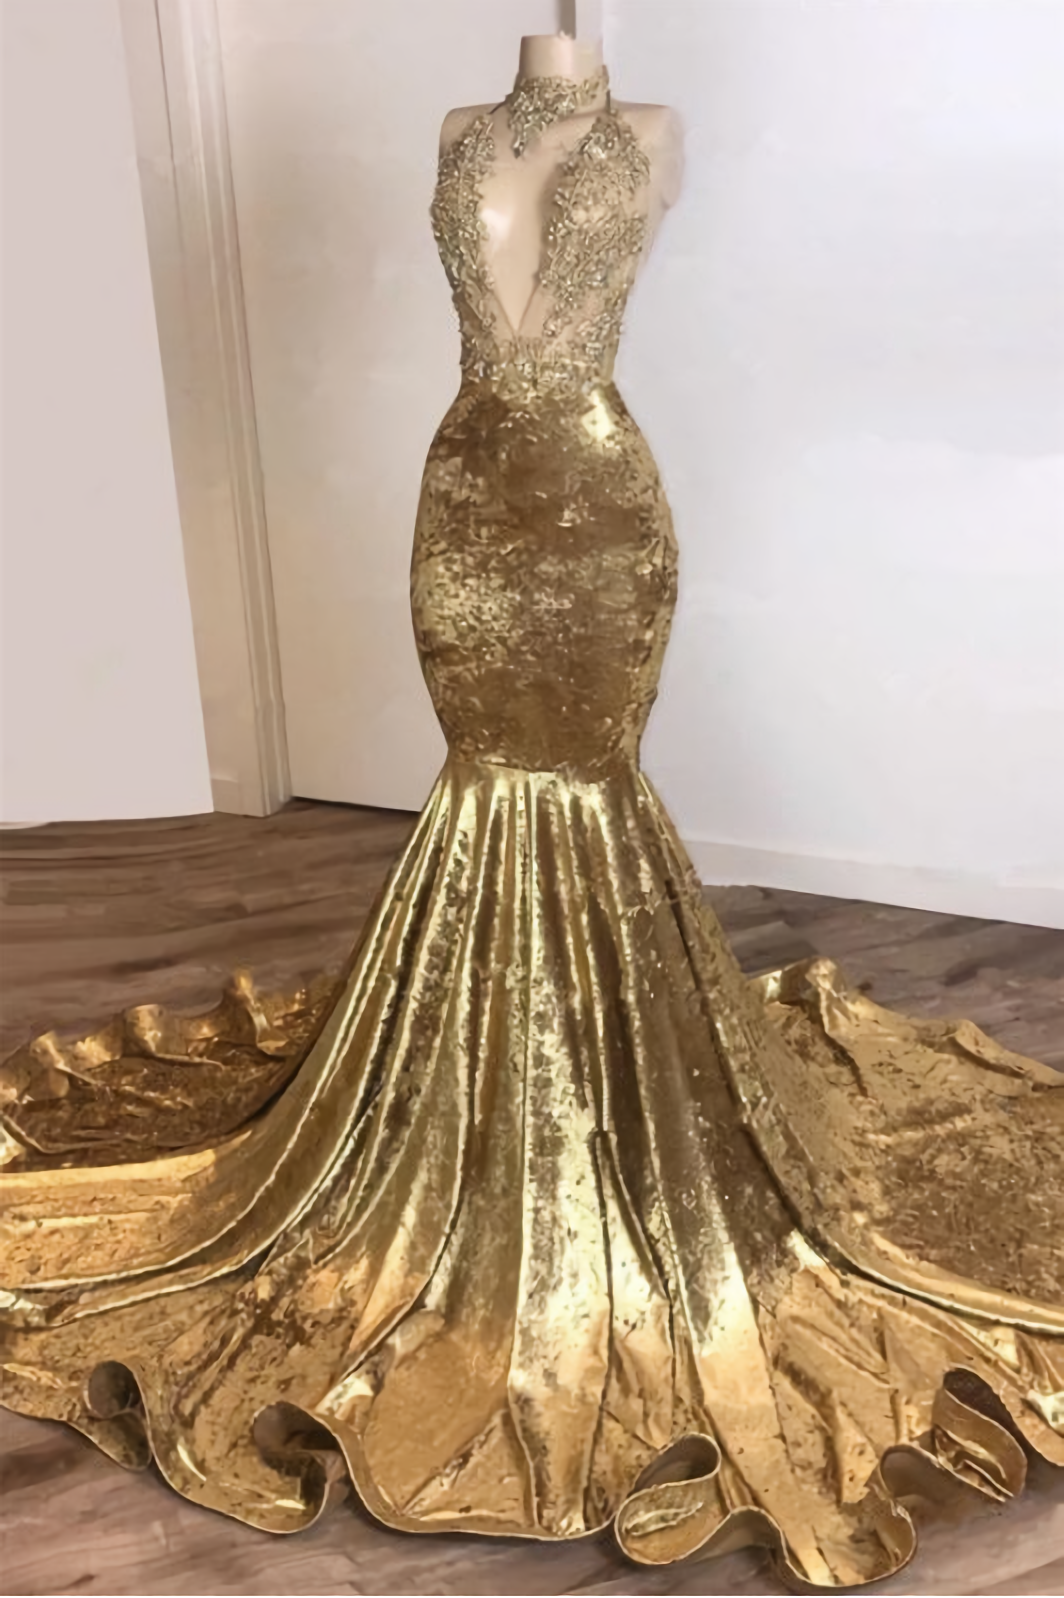 Halter Backless Gold Prom Dresses, Cheap With Beads Appliques Mermaid Velvet Sexy Evening Gowns